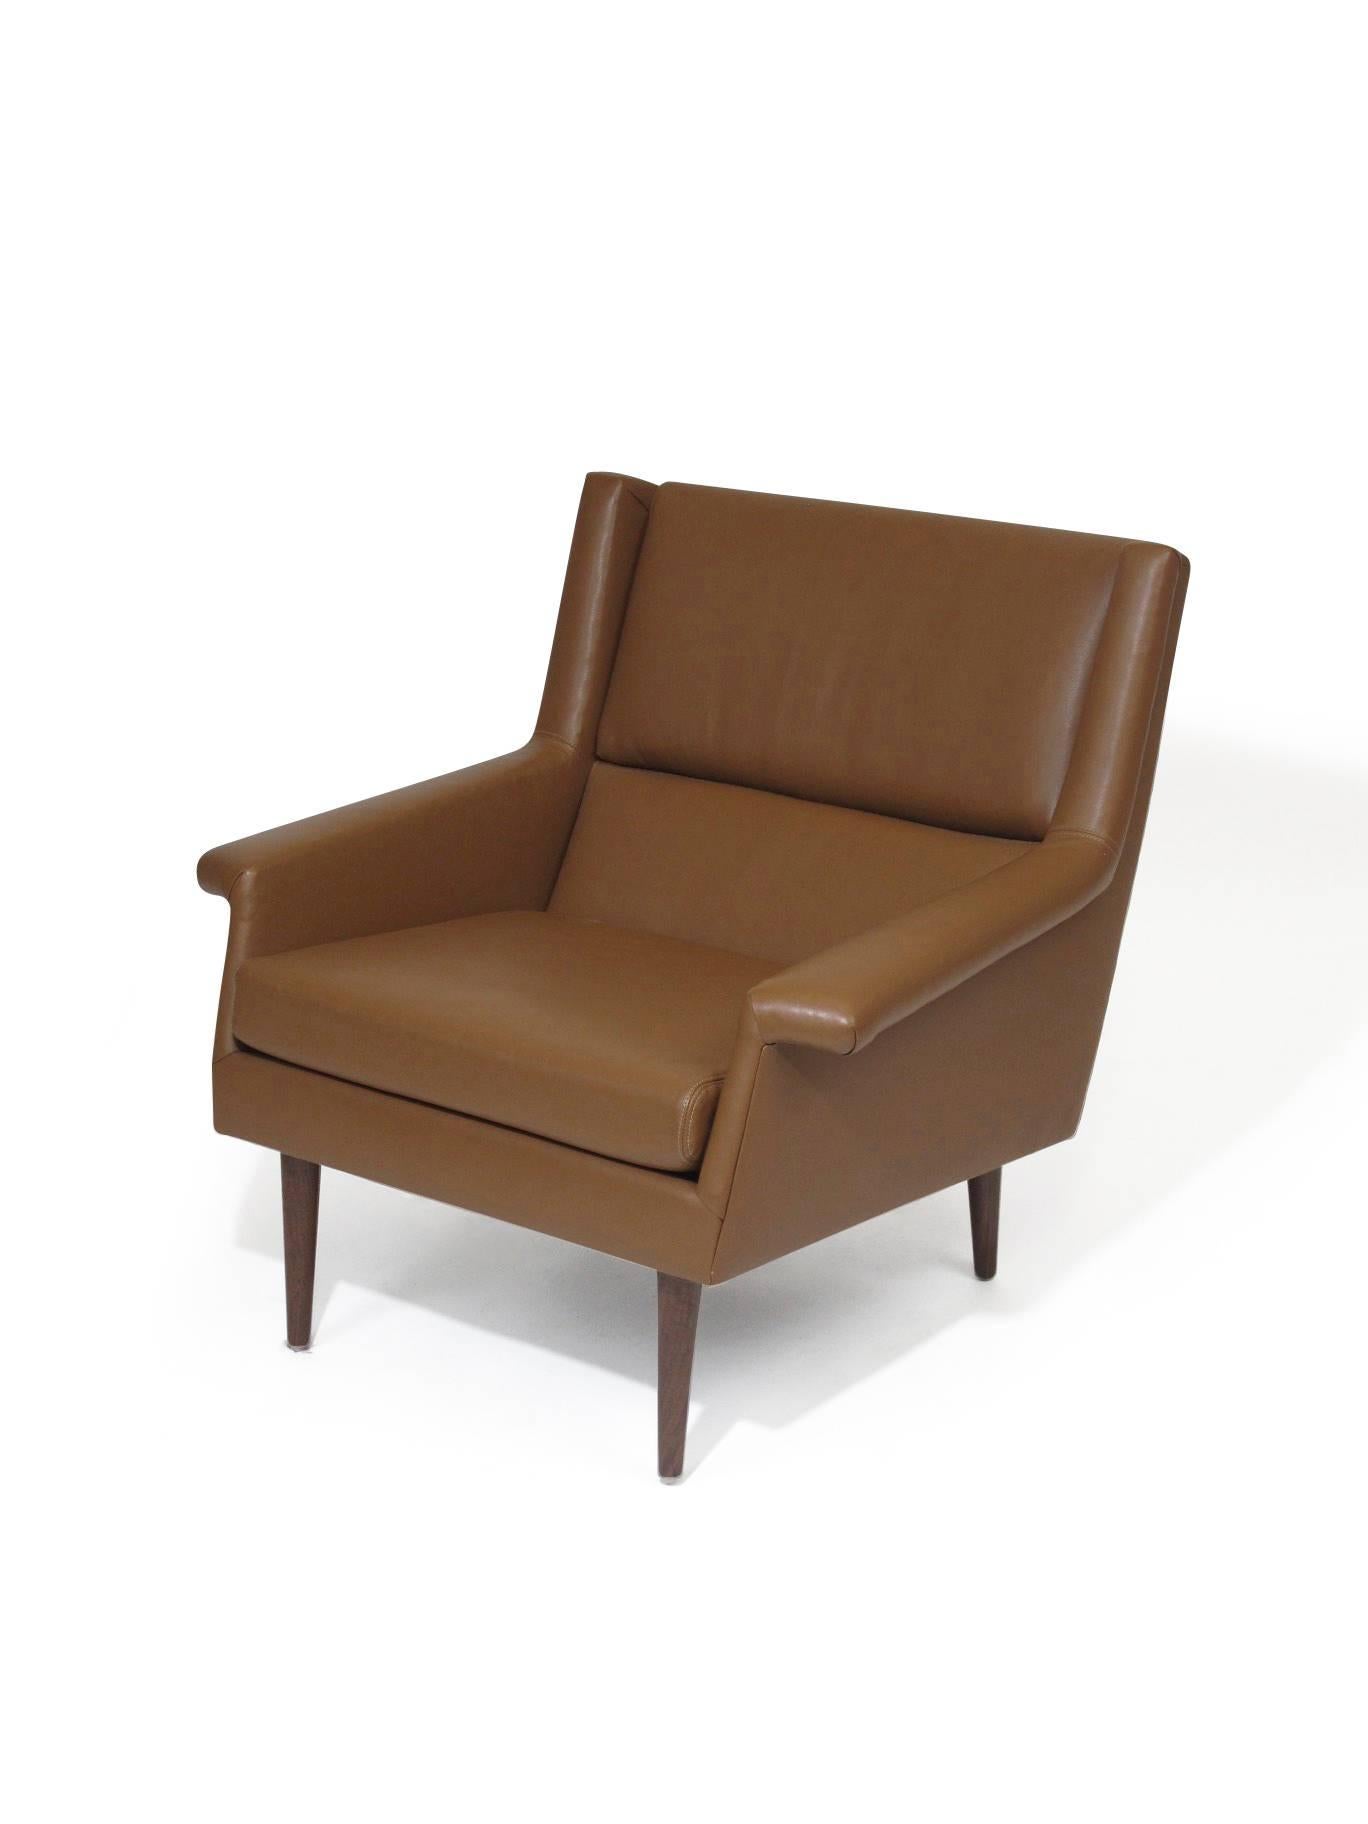 Lounge chair designed by Milo Baughman for Thayer Coggin upholstered in brown leather raised on solid walnut legs.





    